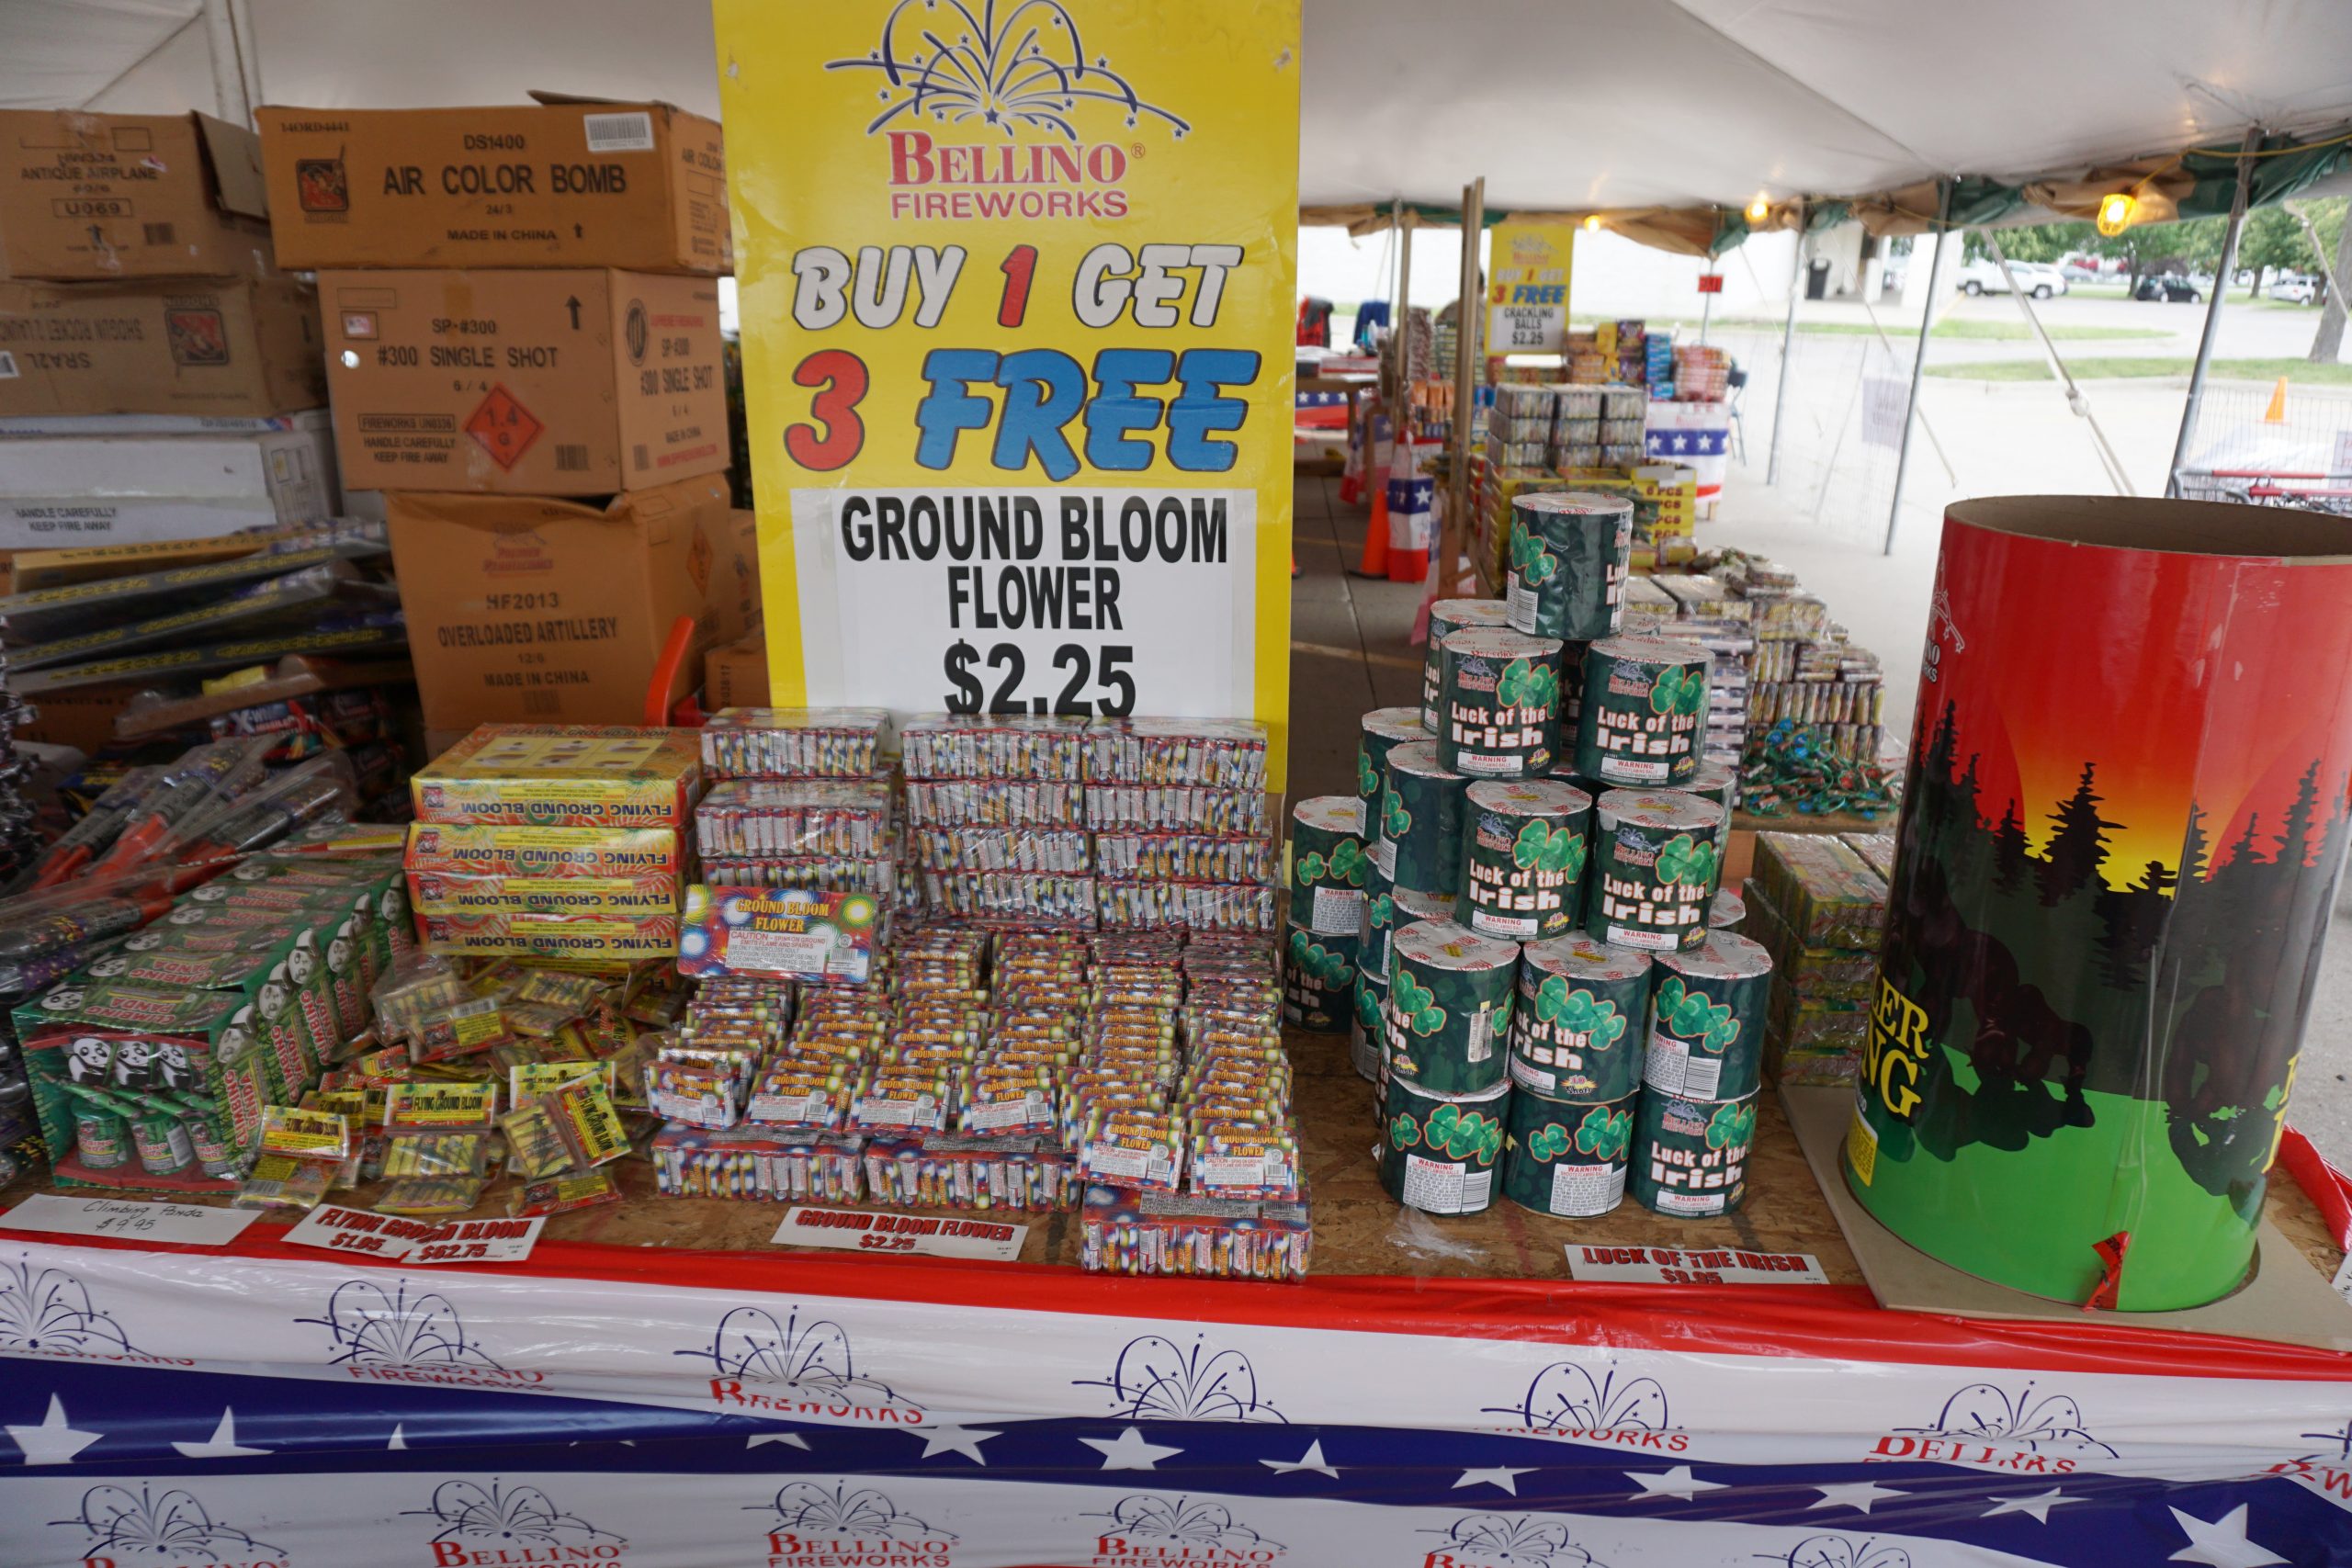 Small to large Fireworks at the Bellino Fireworks tent at Hy-Vee 1720 Waterfront Dr, Iowa City, IA 52240